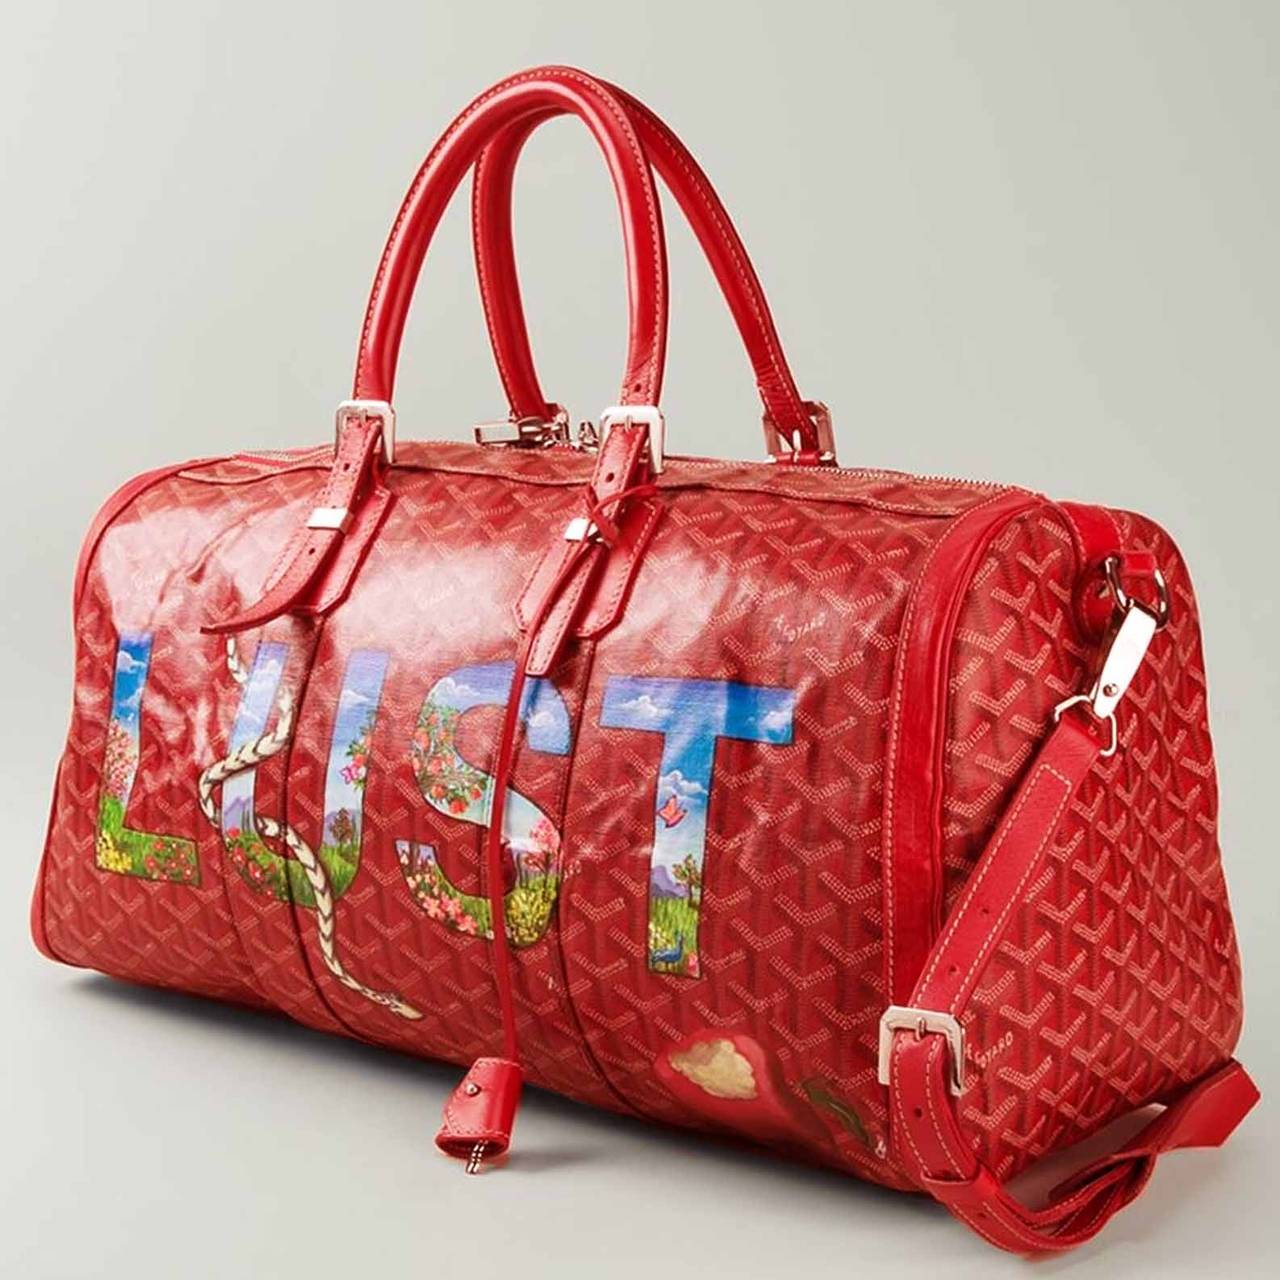 Goyard Hand Painted Red Bag. This is a hand painted customized Goyard bag.Hand painted vintage Goyard Leather red barrel bag, accented with gold-Tone hardware.

Material: Leather

Colour: Red, Hand-painted design

Condition: Excellent vintage